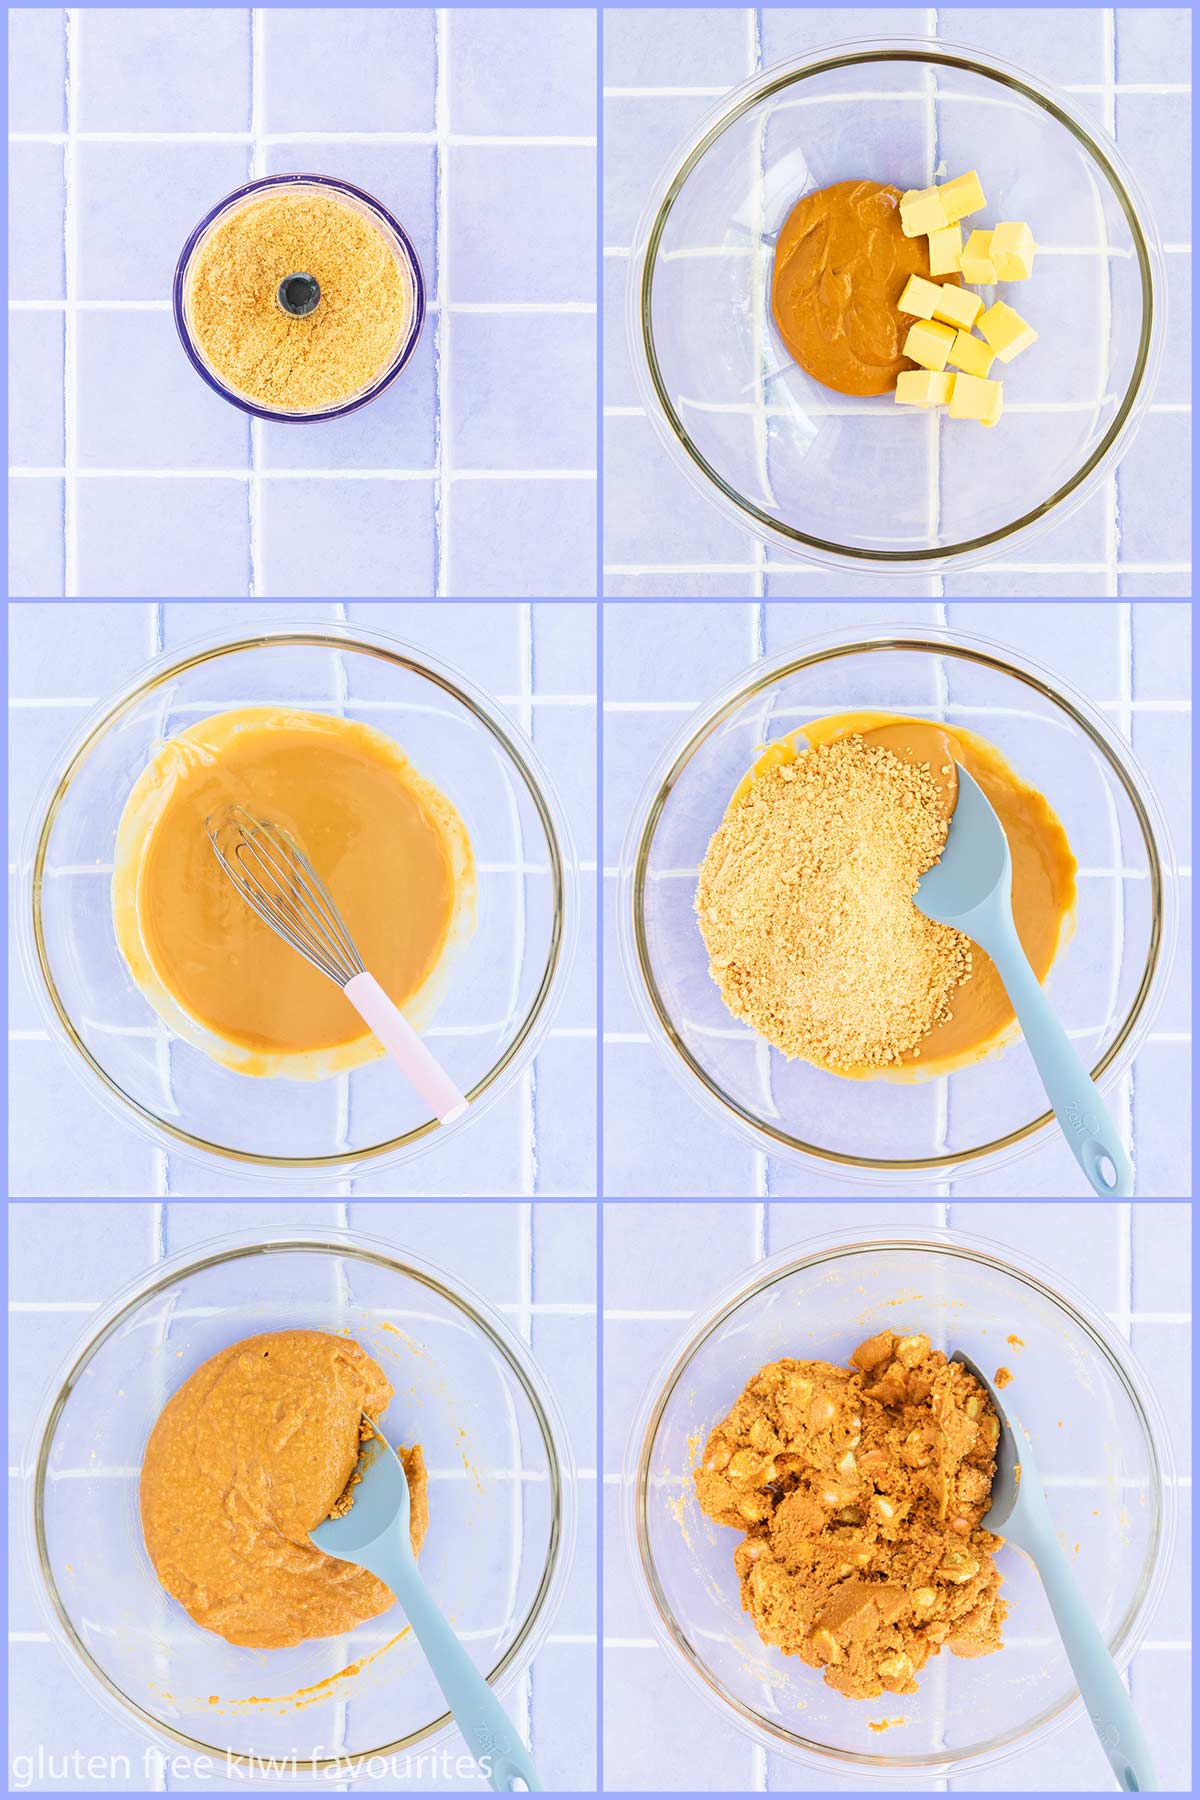 Collage of six images showing the steps of melting and mixing the ingredients.